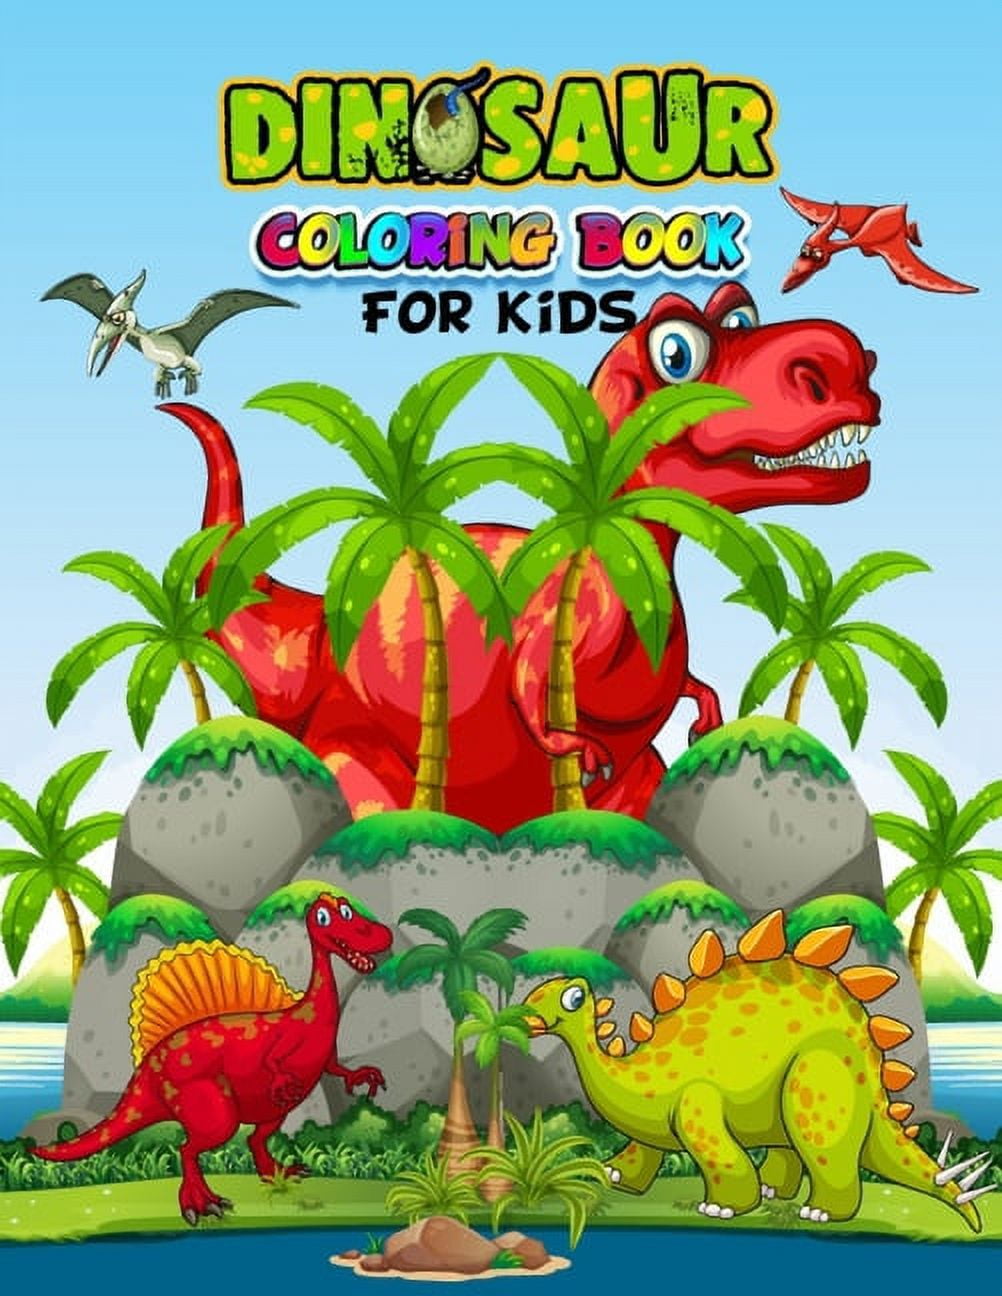 Coloring Book Kids & Toddlers Ages 2-4 Cute Dinosaurs: Dino Painting Book  for Kids Ages 2,3 and 4  Preeschooler Colouring Book with T-Rex,  Triceratops & more - Cloth.ly Coloring Books: 9781073713905 - AbeBooks